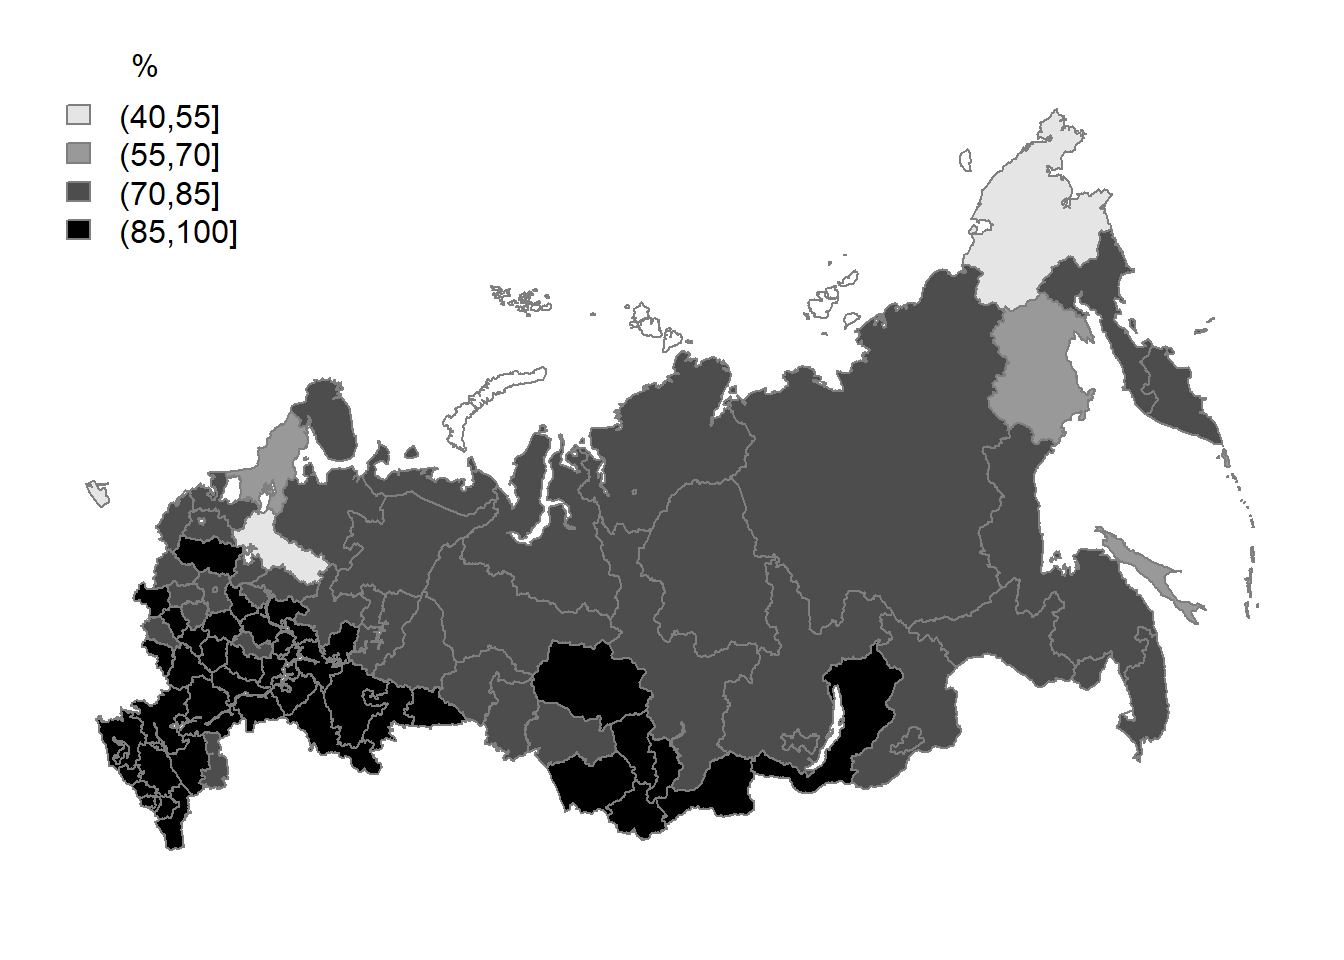 HOR (share of personally owned space) in Russian regions, 2013